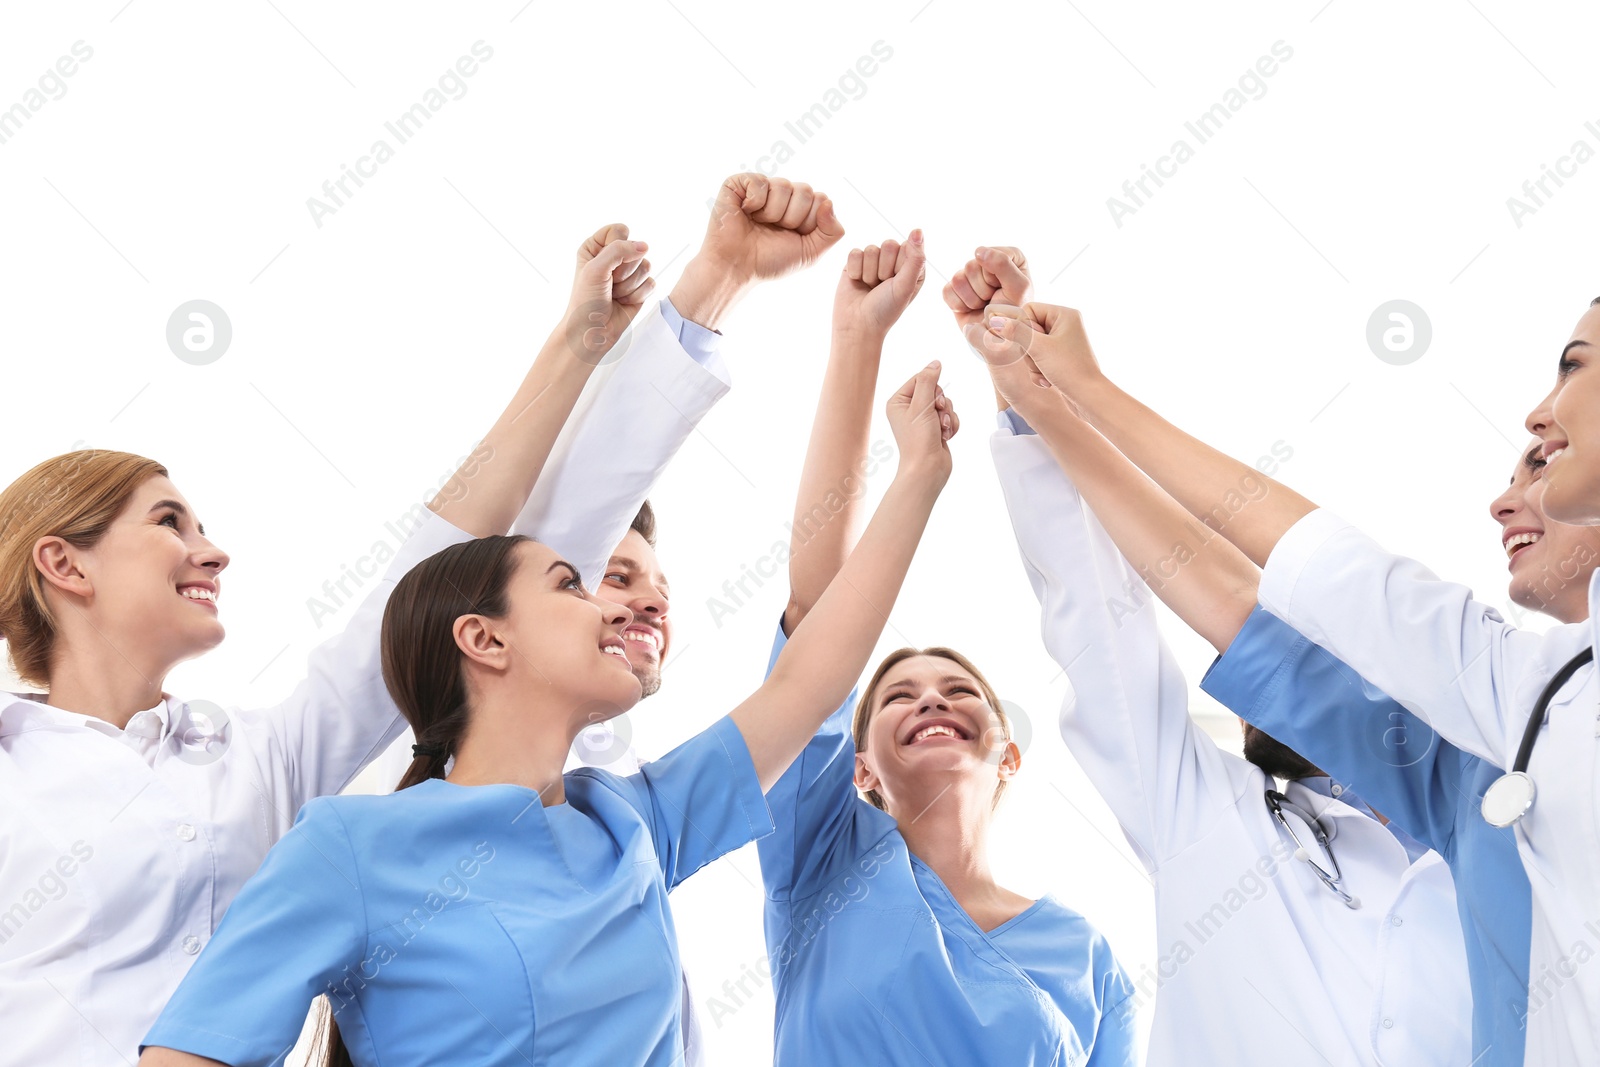 Photo of Team of medical doctors raising hands together on white background. Unity concept